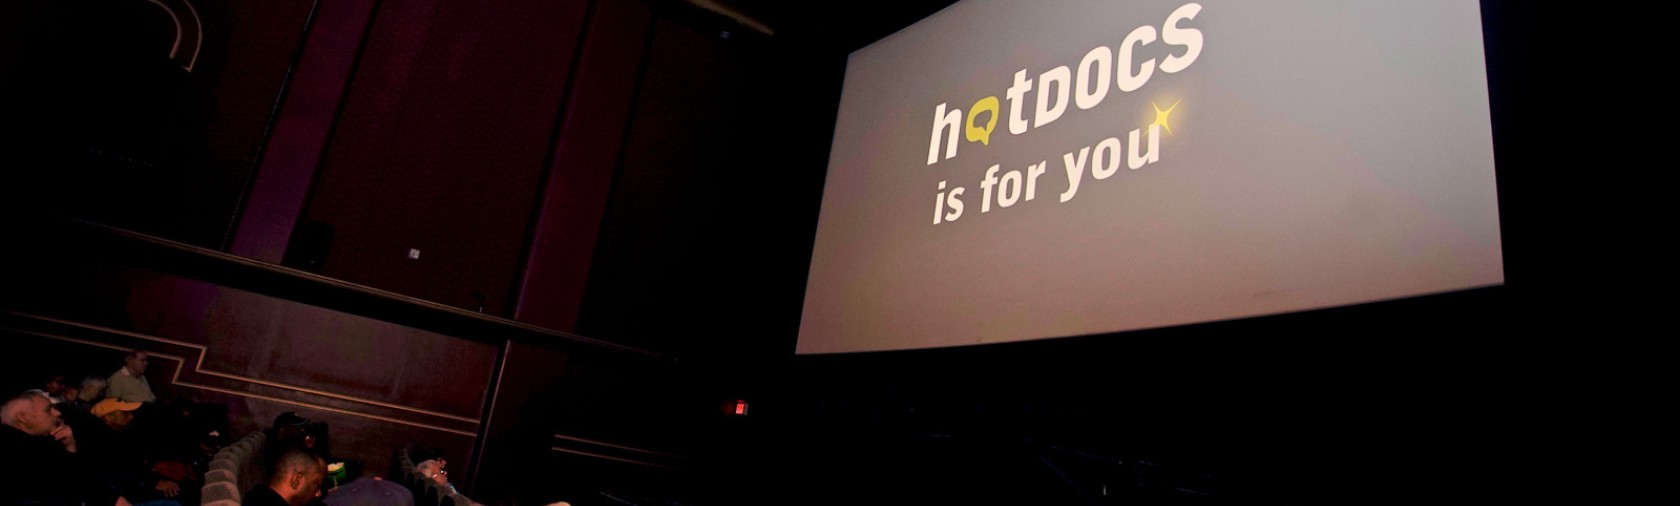 Hot Docs Cinema screen reads Hot Docs is for you